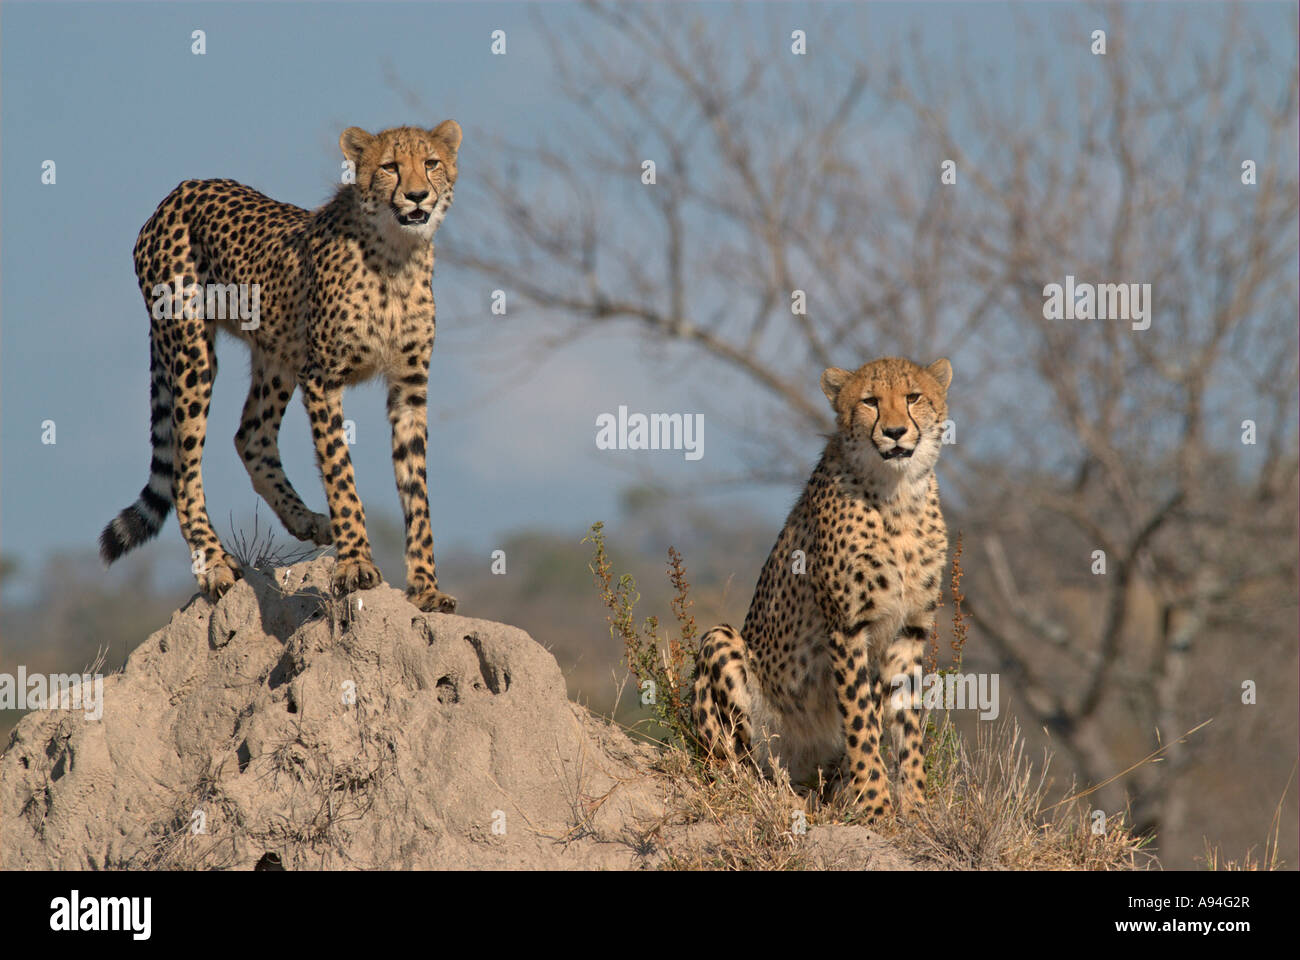 Two cheetah using an anthill as a vantage point Londolozi Sabi Sand Mpumalanga South Africa Stock Photo